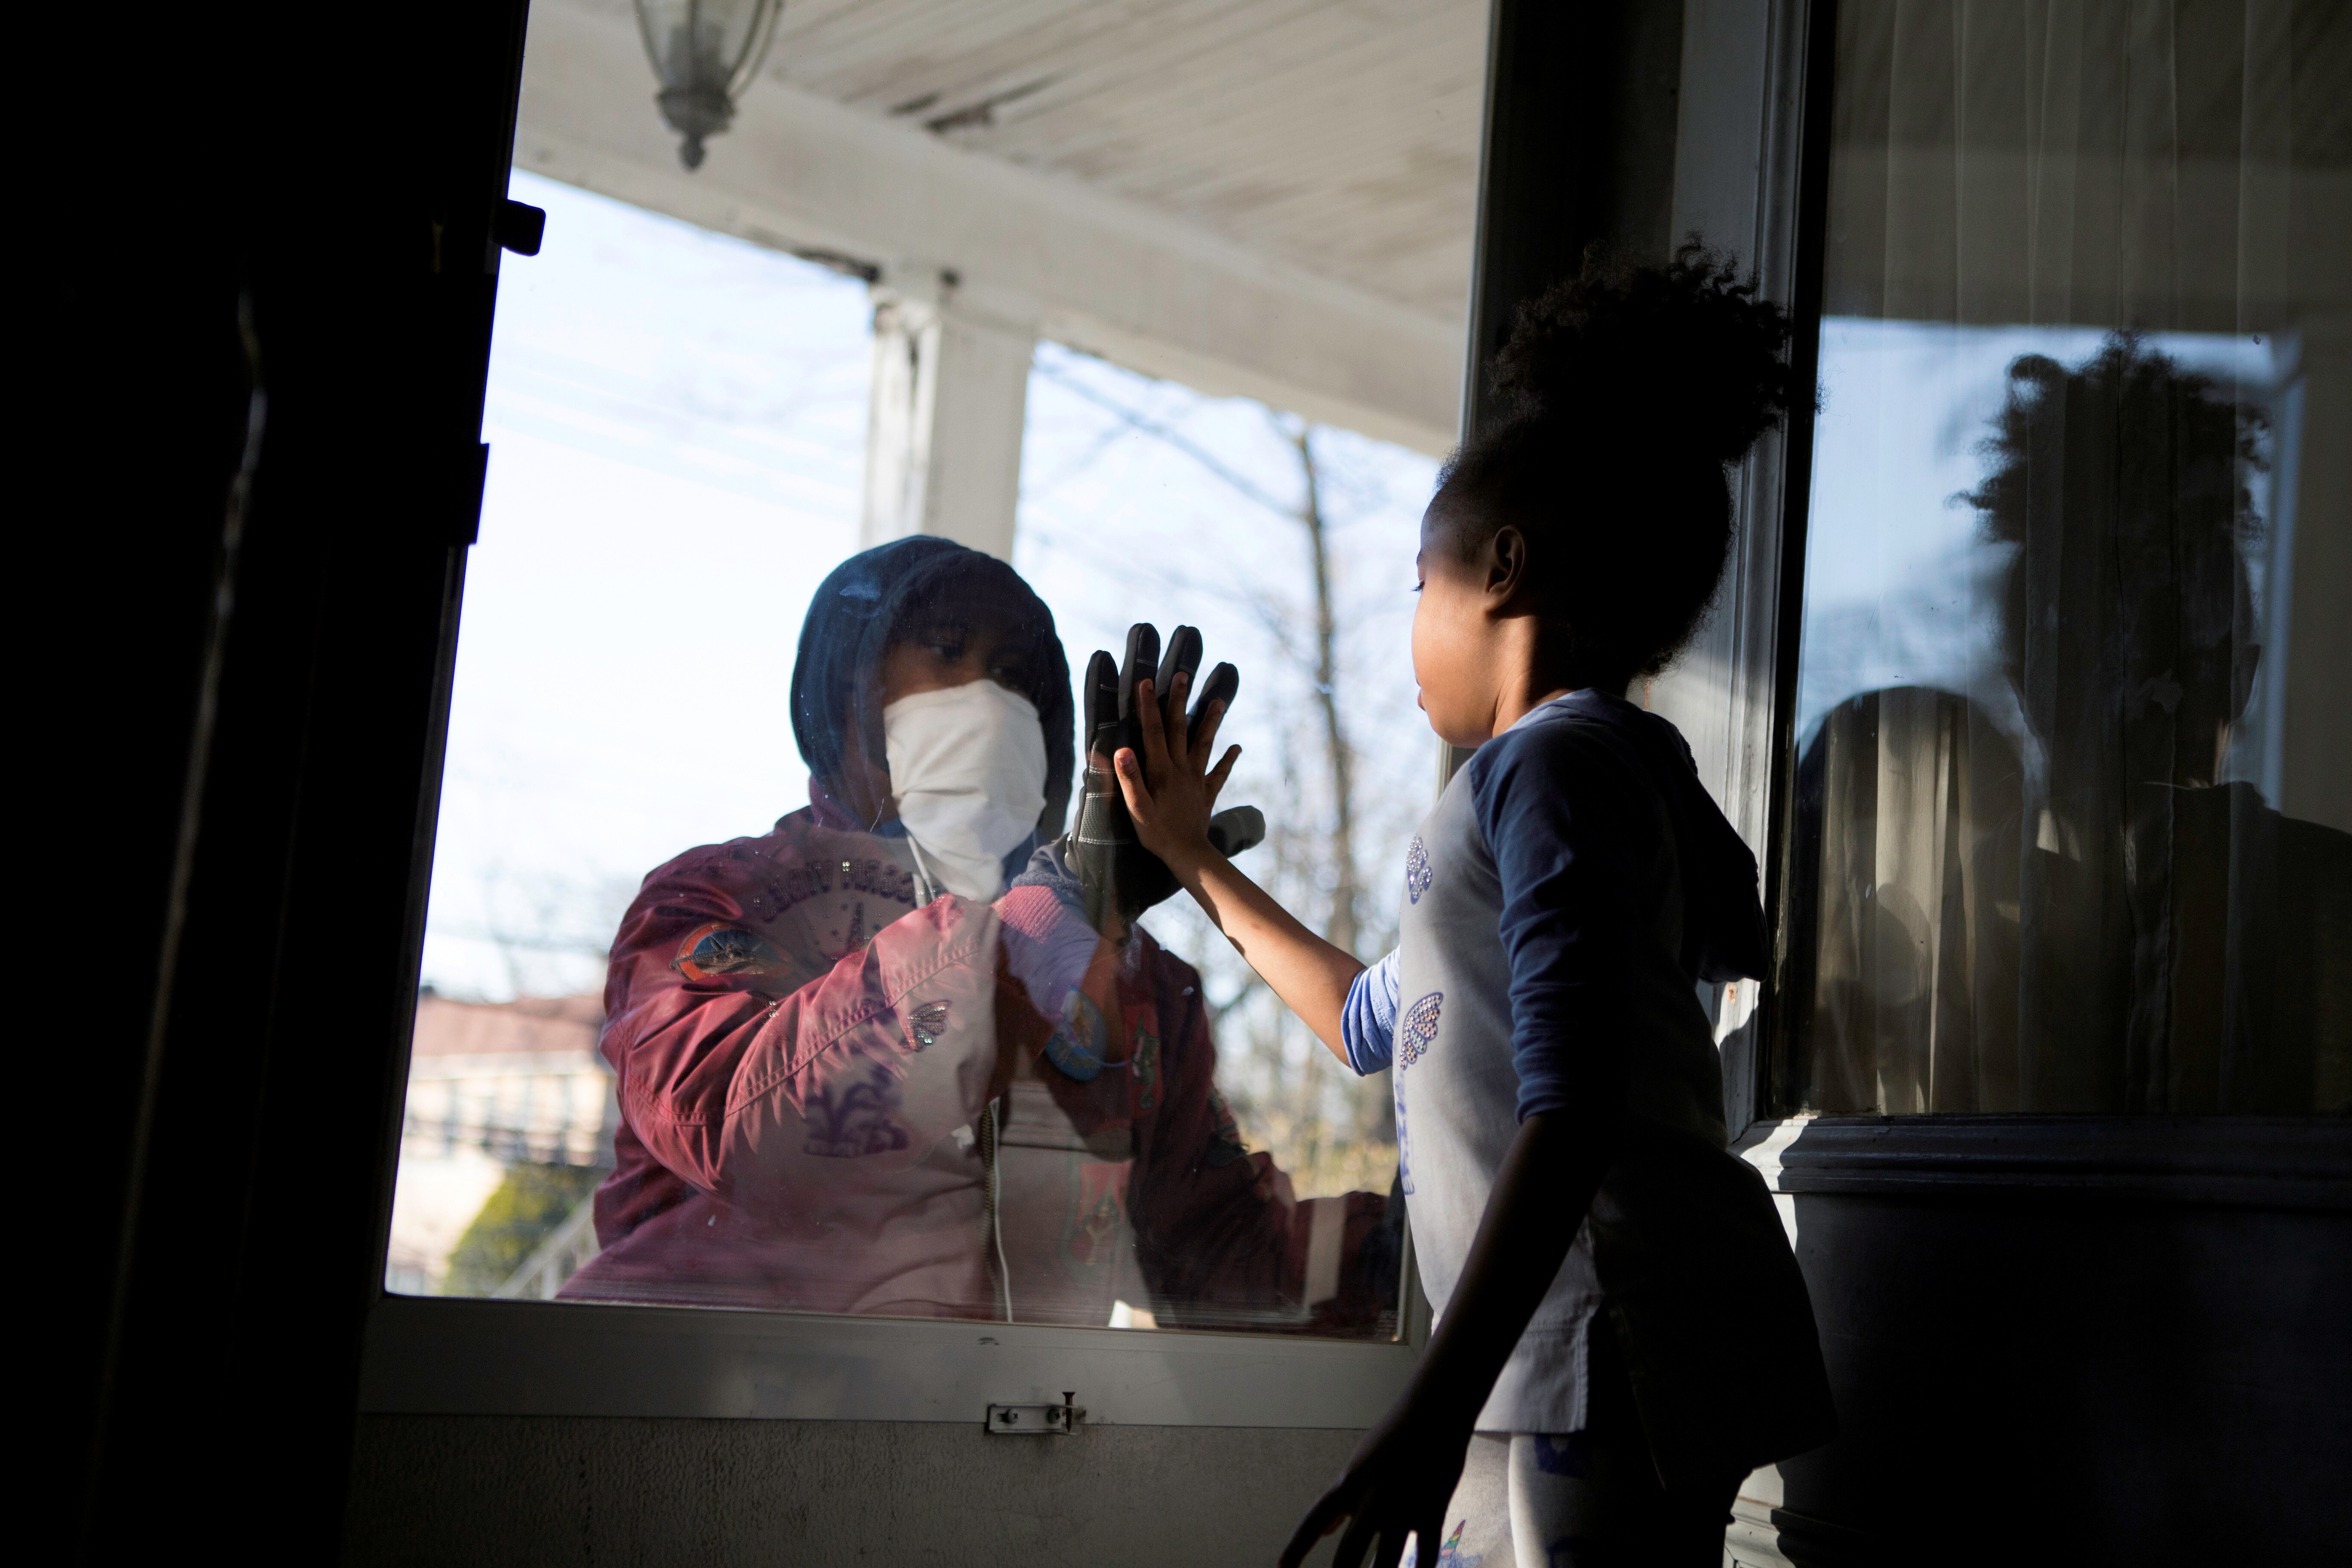 Hashim, an essential worker in the healthcare industry, greets his daughter through the closed door as he maintains social distance from his family as he works amid the coronavirus outbreak in New Rochelle, New Jersey. Photo: Reuters